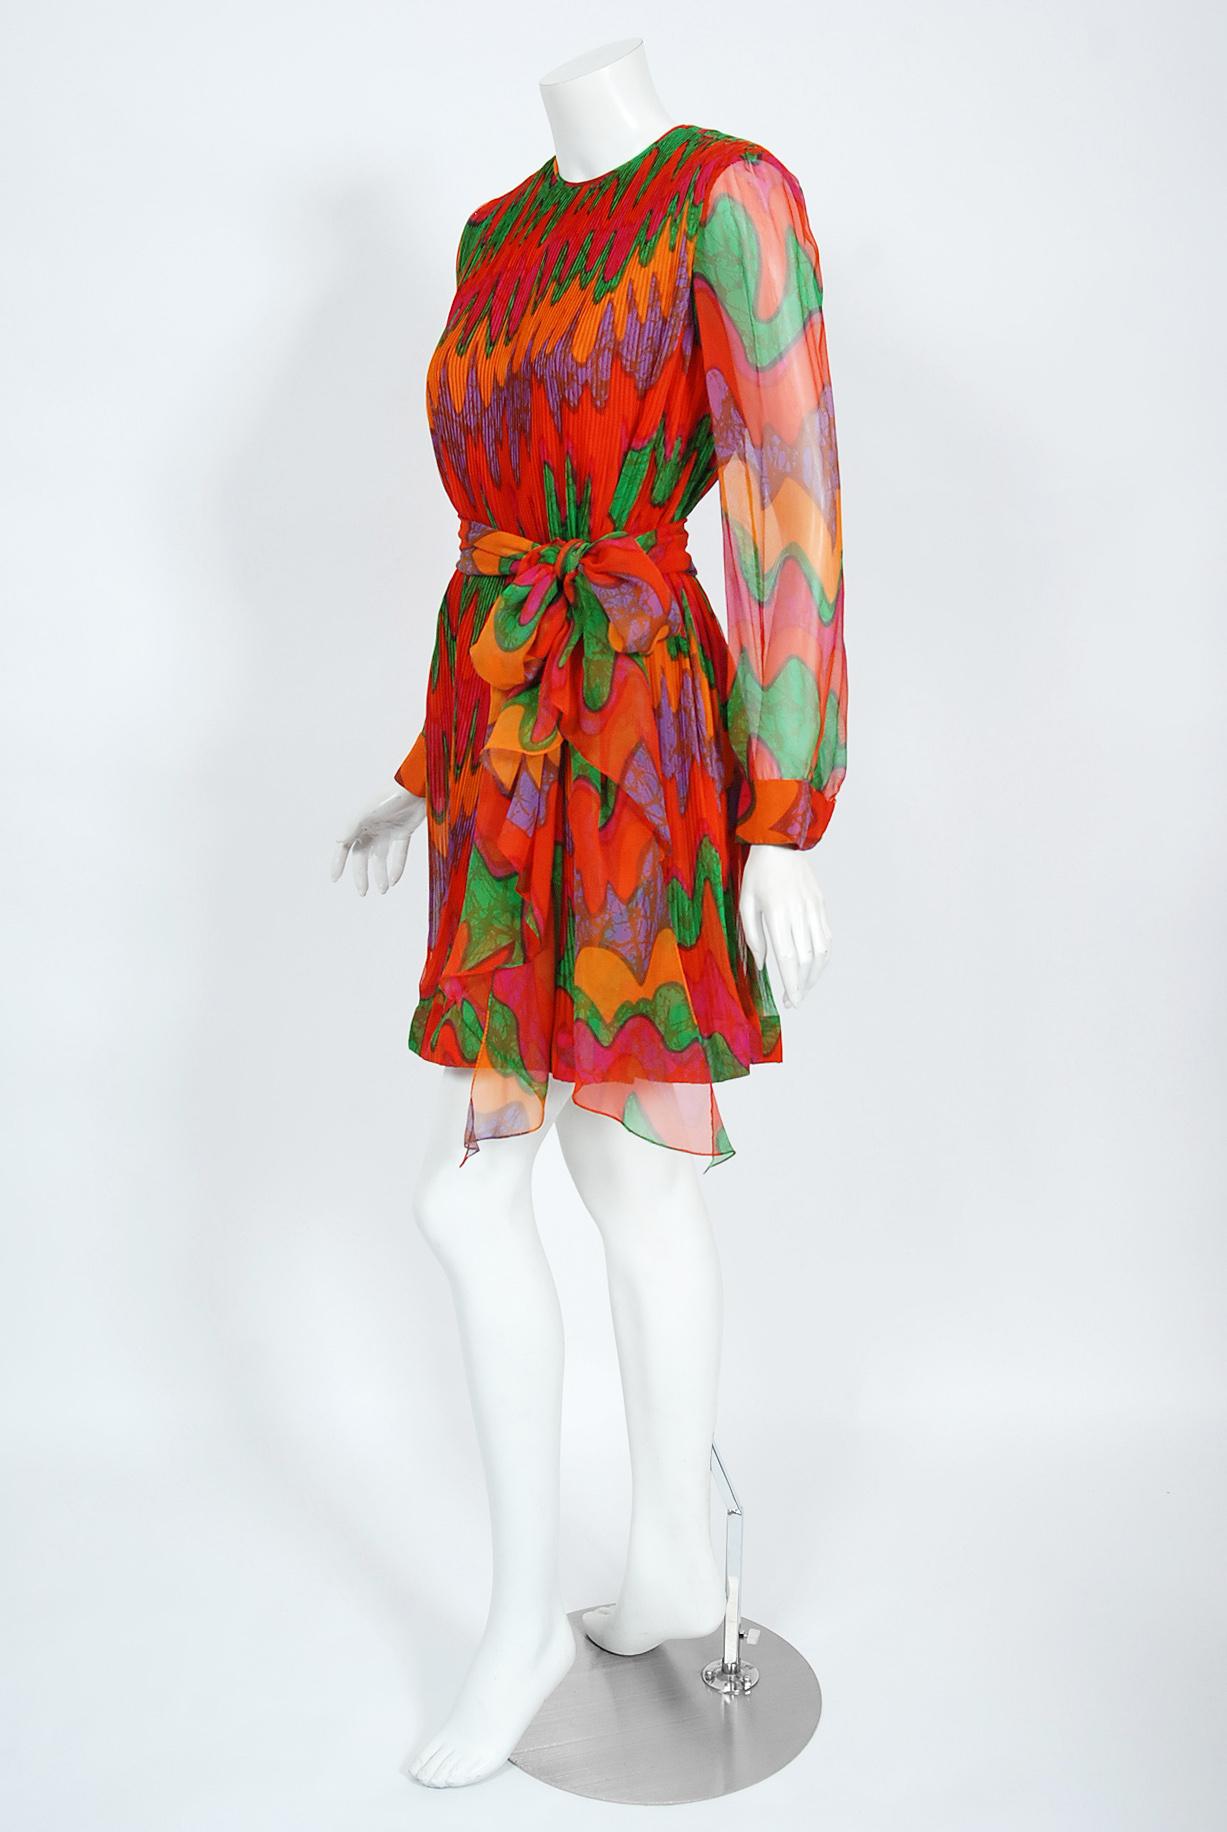 Vintage 1968 Pierre Cardin Colorful Psychedelic Pleated Chiffon Mod Mini Dress 6